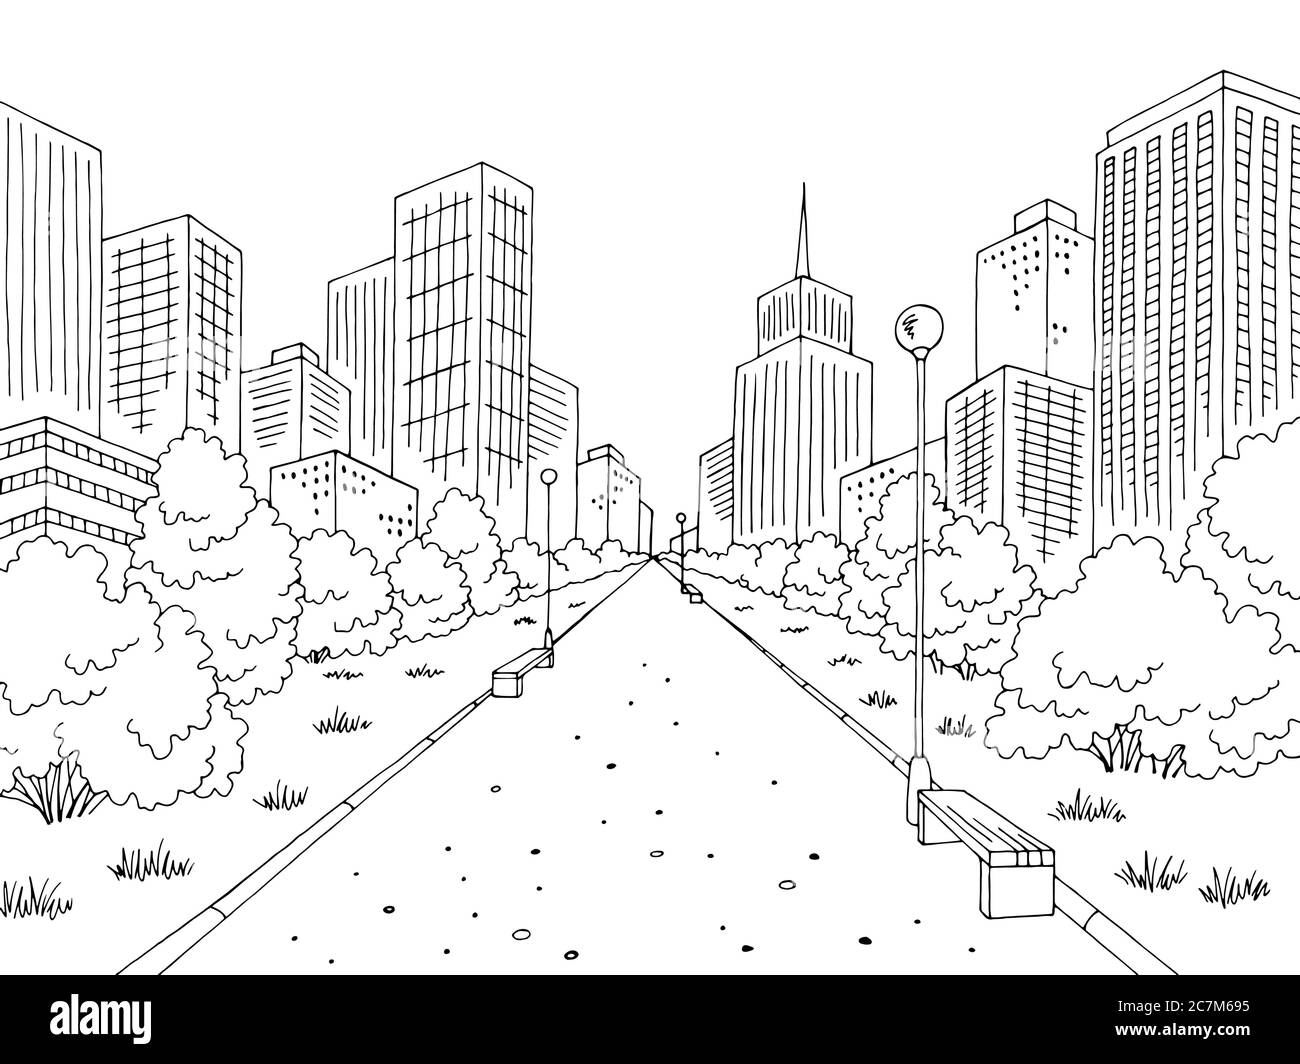 City Sketch Vector for Free Download | FreeImages